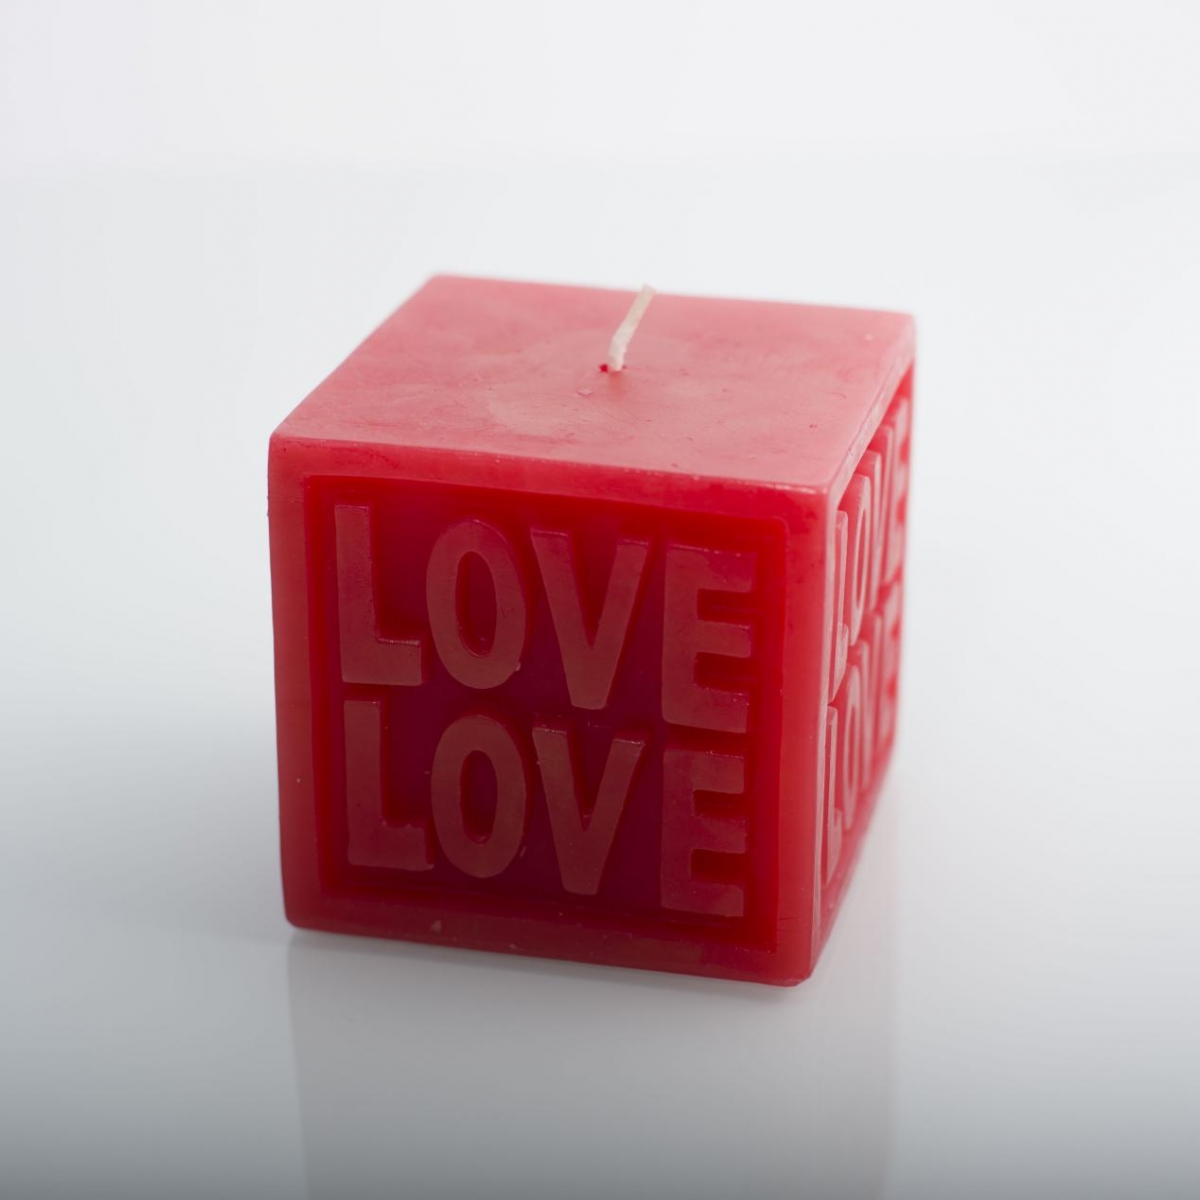 Valentine Day Candles：Red Color ,Cube Shape ,LOVE Sculpture ,China Factory ,Price-HOWCANDLE-Candles,Scented Candles,Aromatherapy Candles,Soy Candles,Vegan Candles,Jar Candles,Pillar Candles,Candle Gift Sets,Essential Oils,Reed Diffuser,Candle Holder,